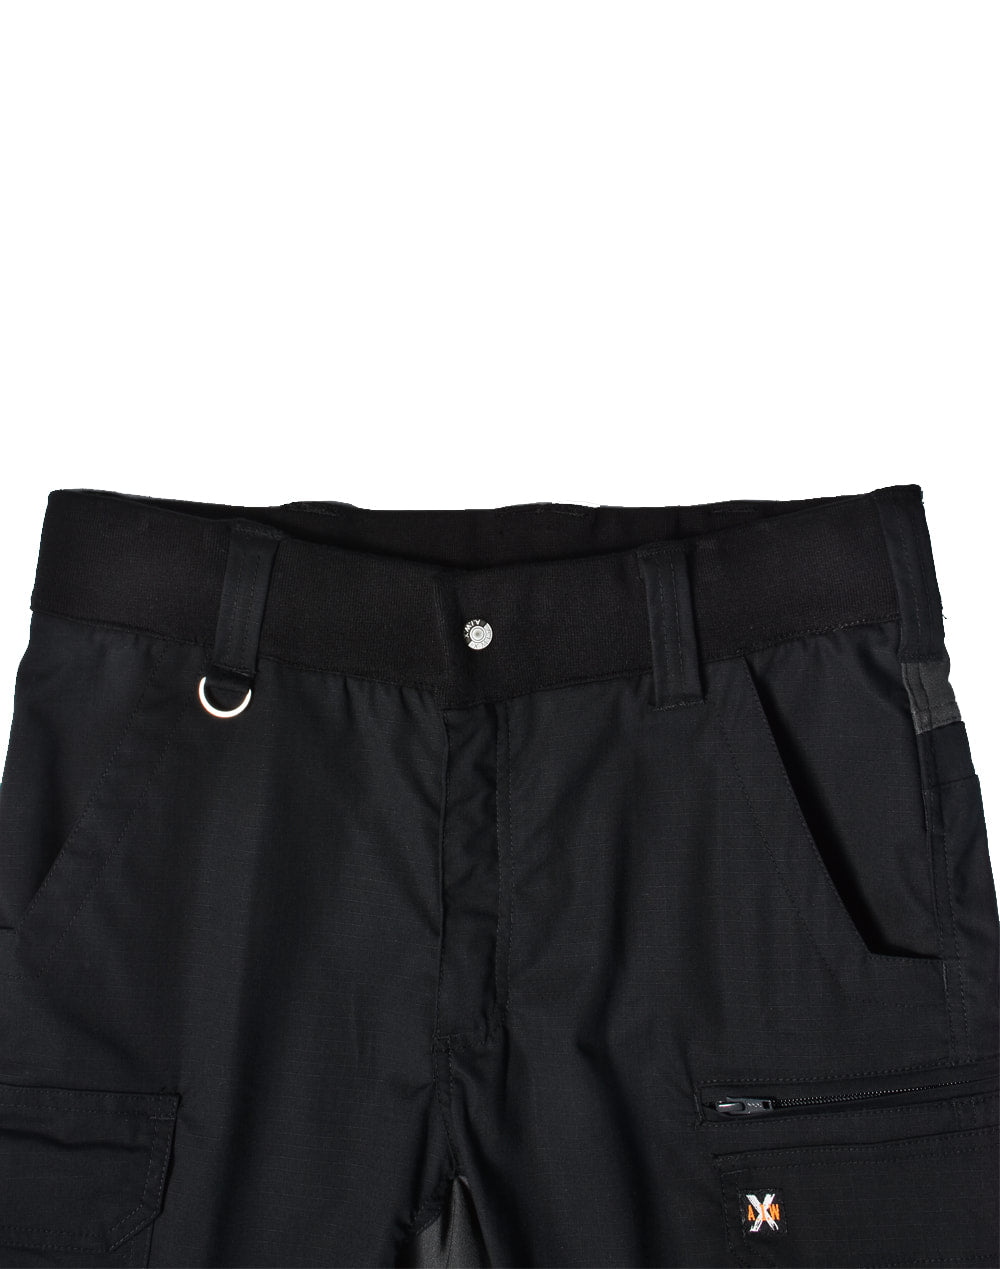 AIW WP25 UNISEX RIPSTOP STRETCH WORK SHORTS